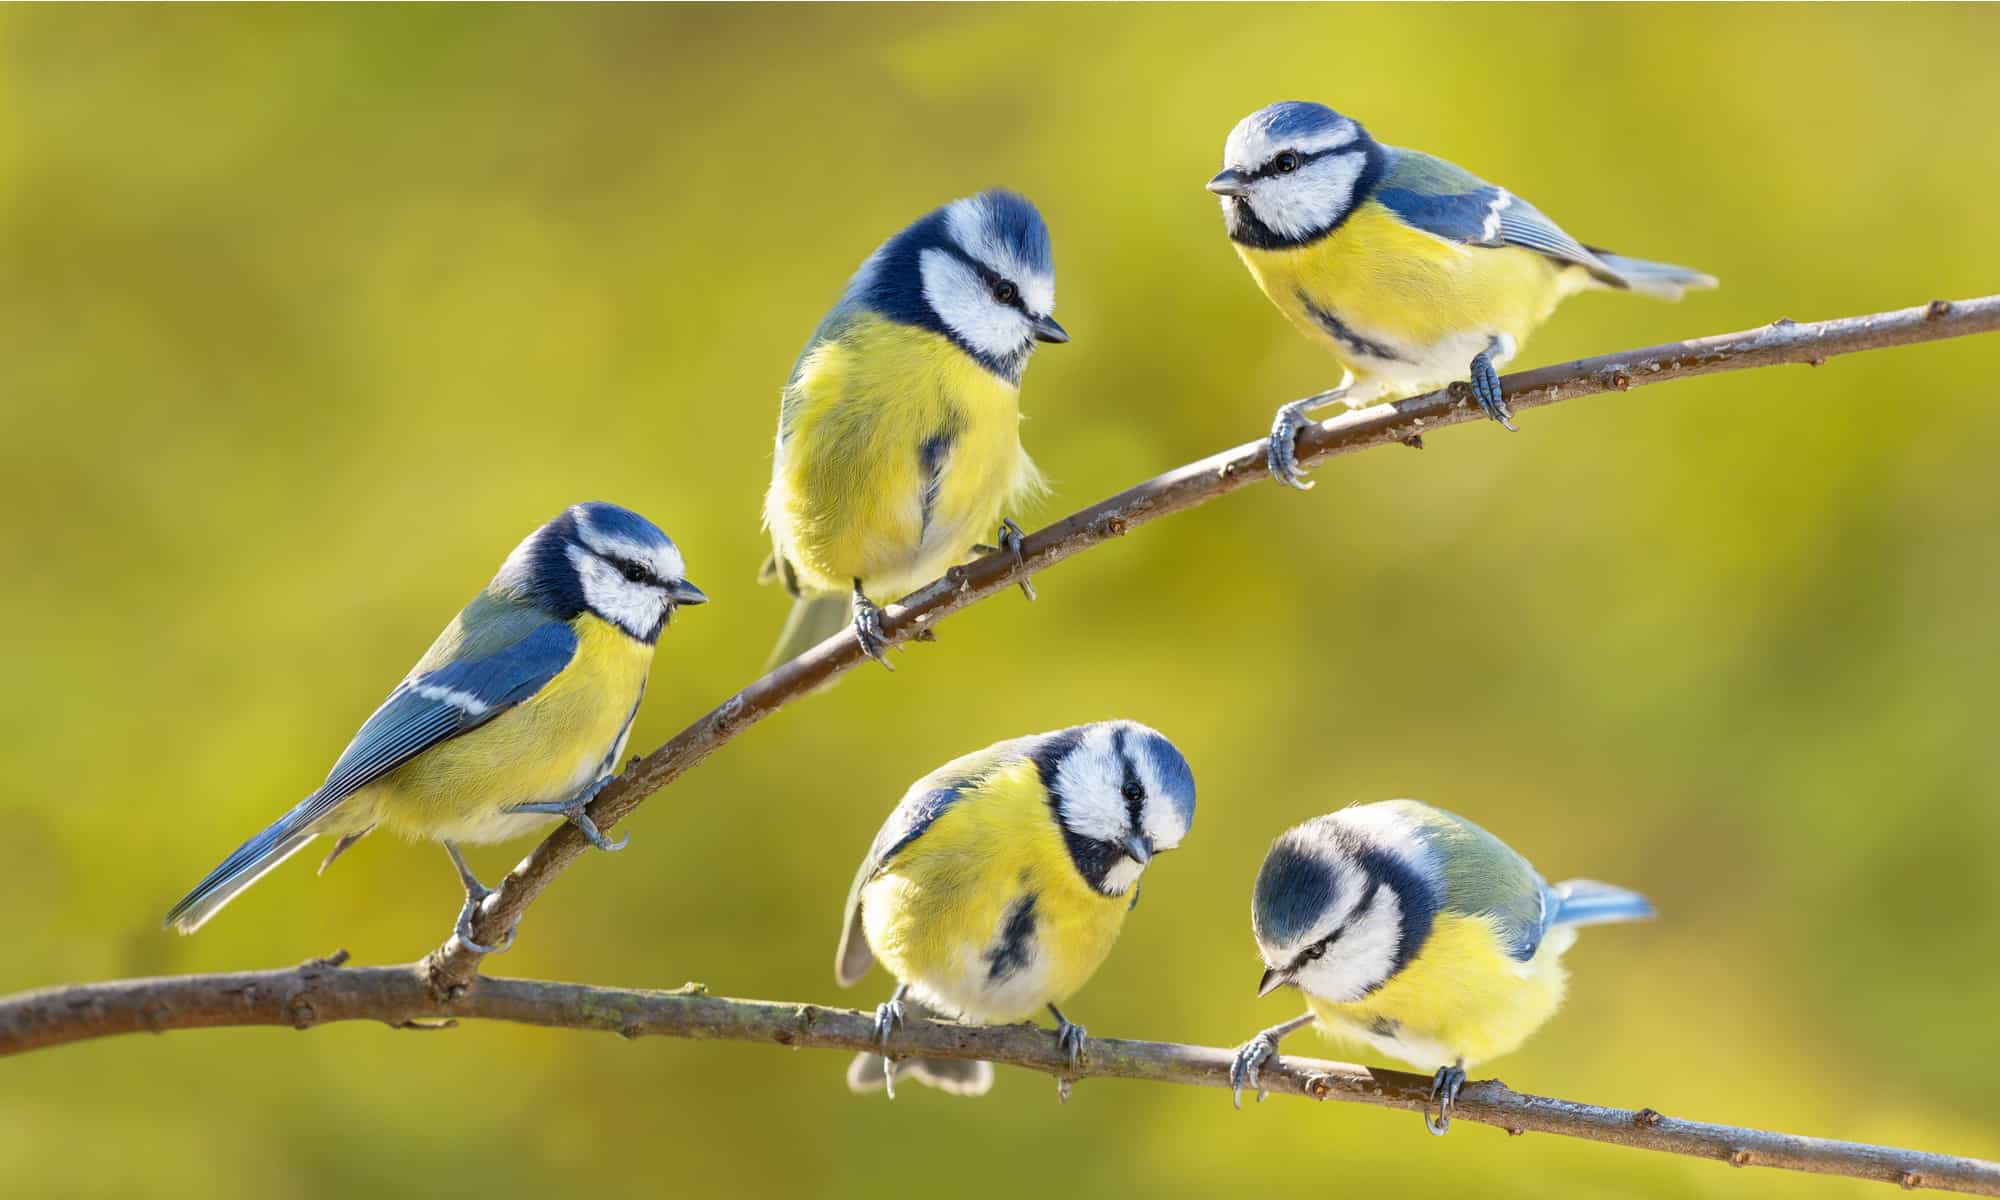 Discover The Many Types Of Tit Birds And Their Unique Traits